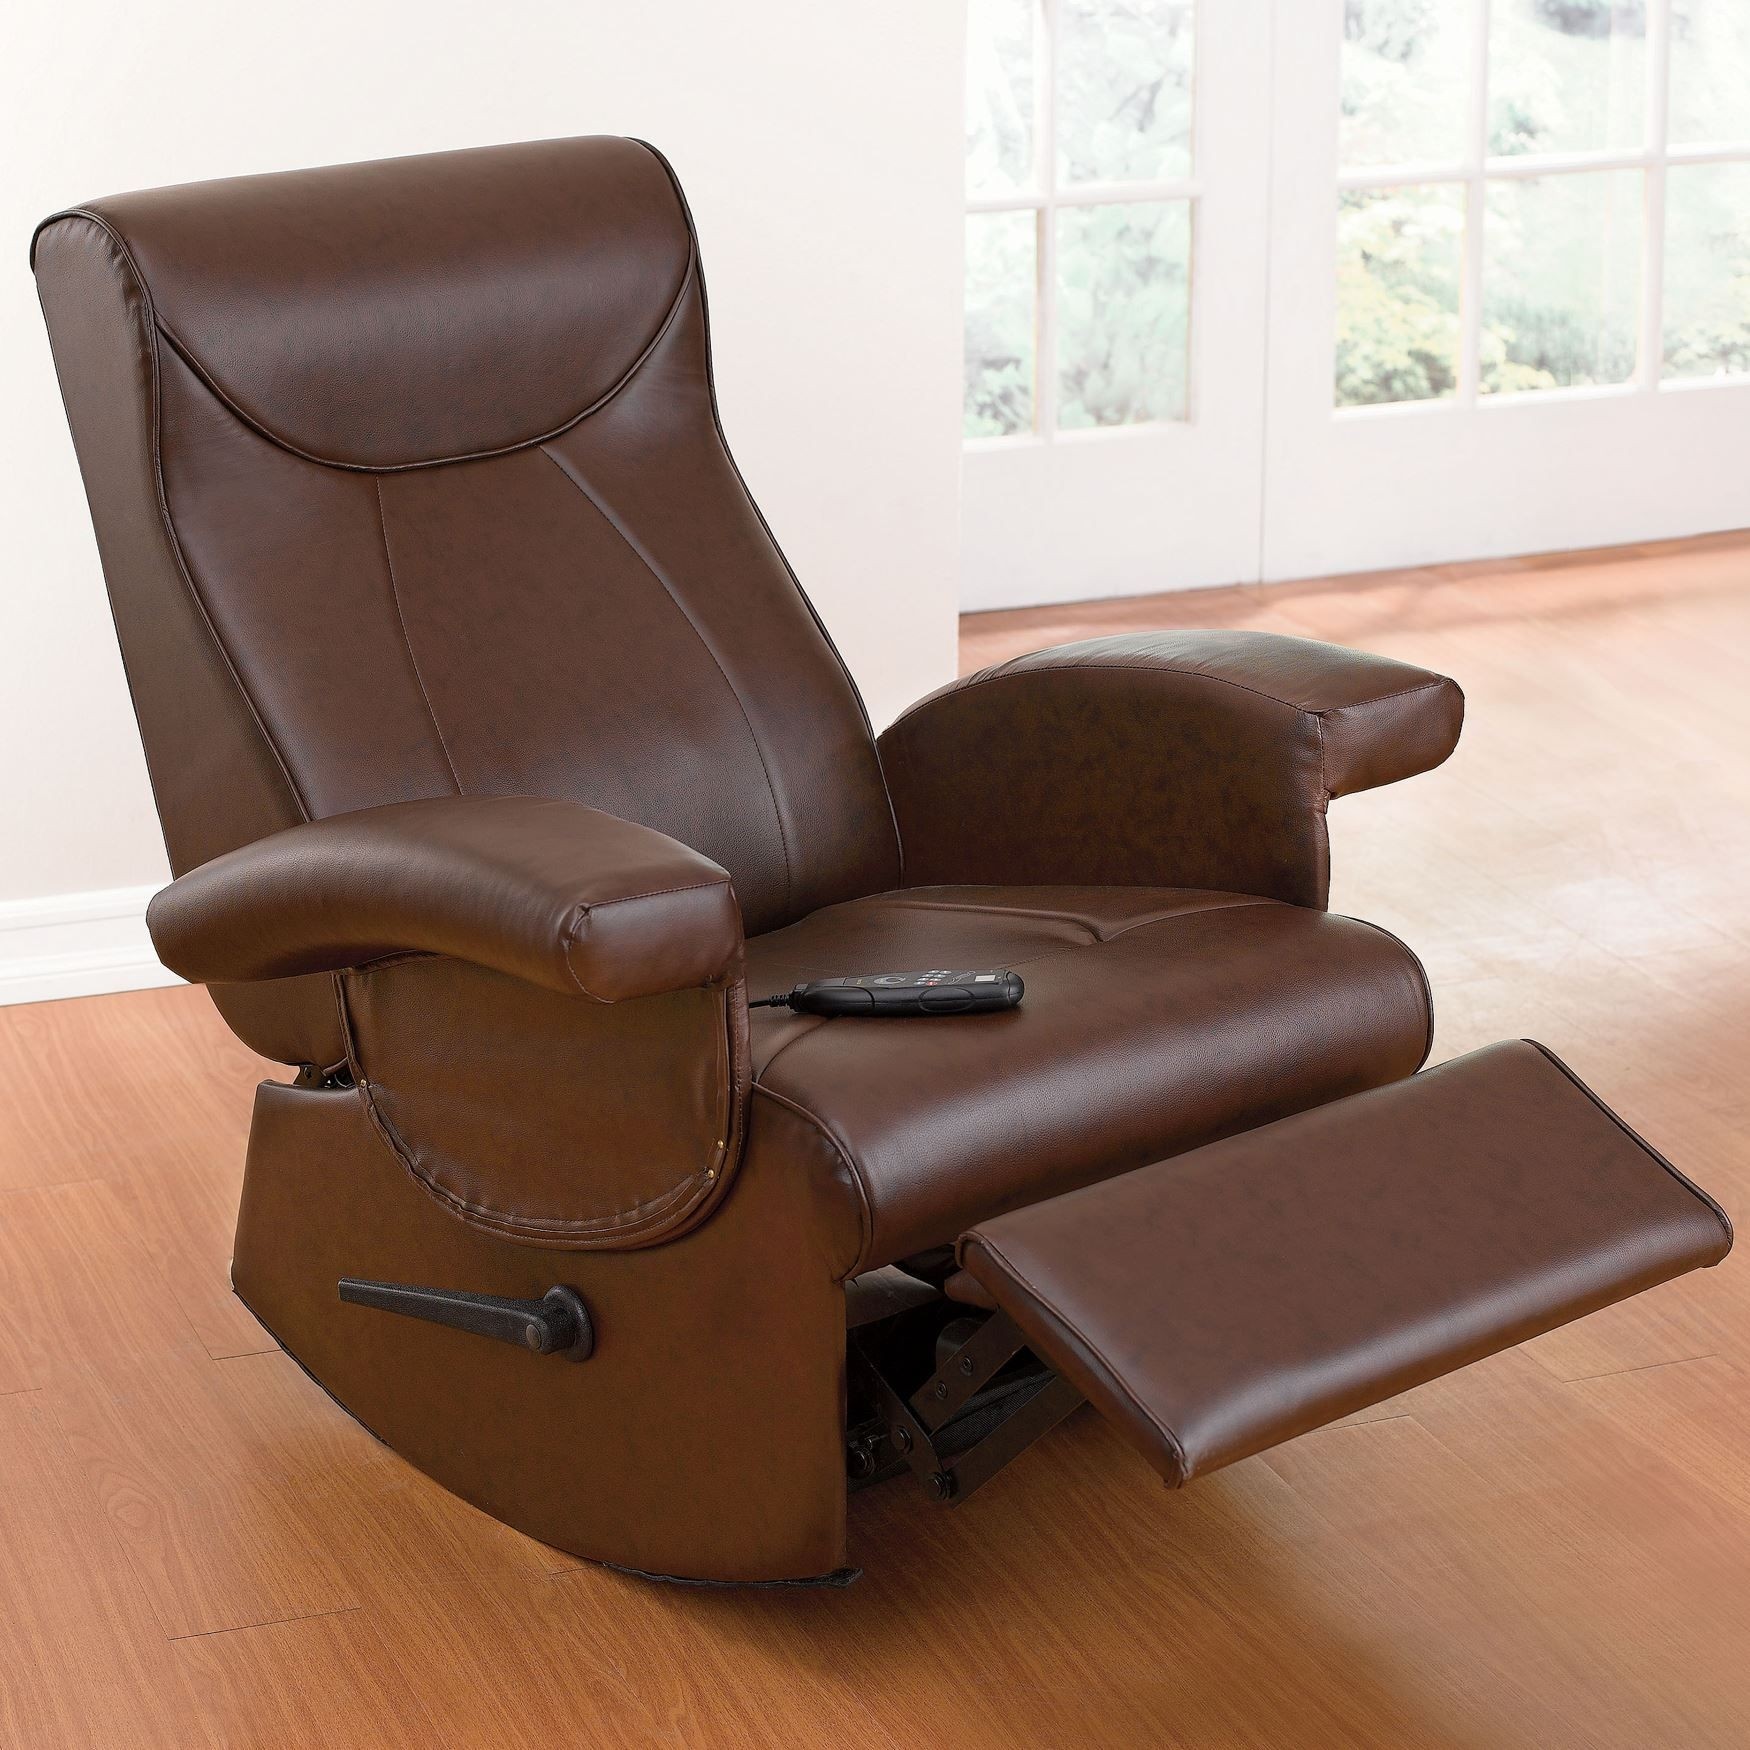 Extra Wide Recliner Chair Ideas On Foter